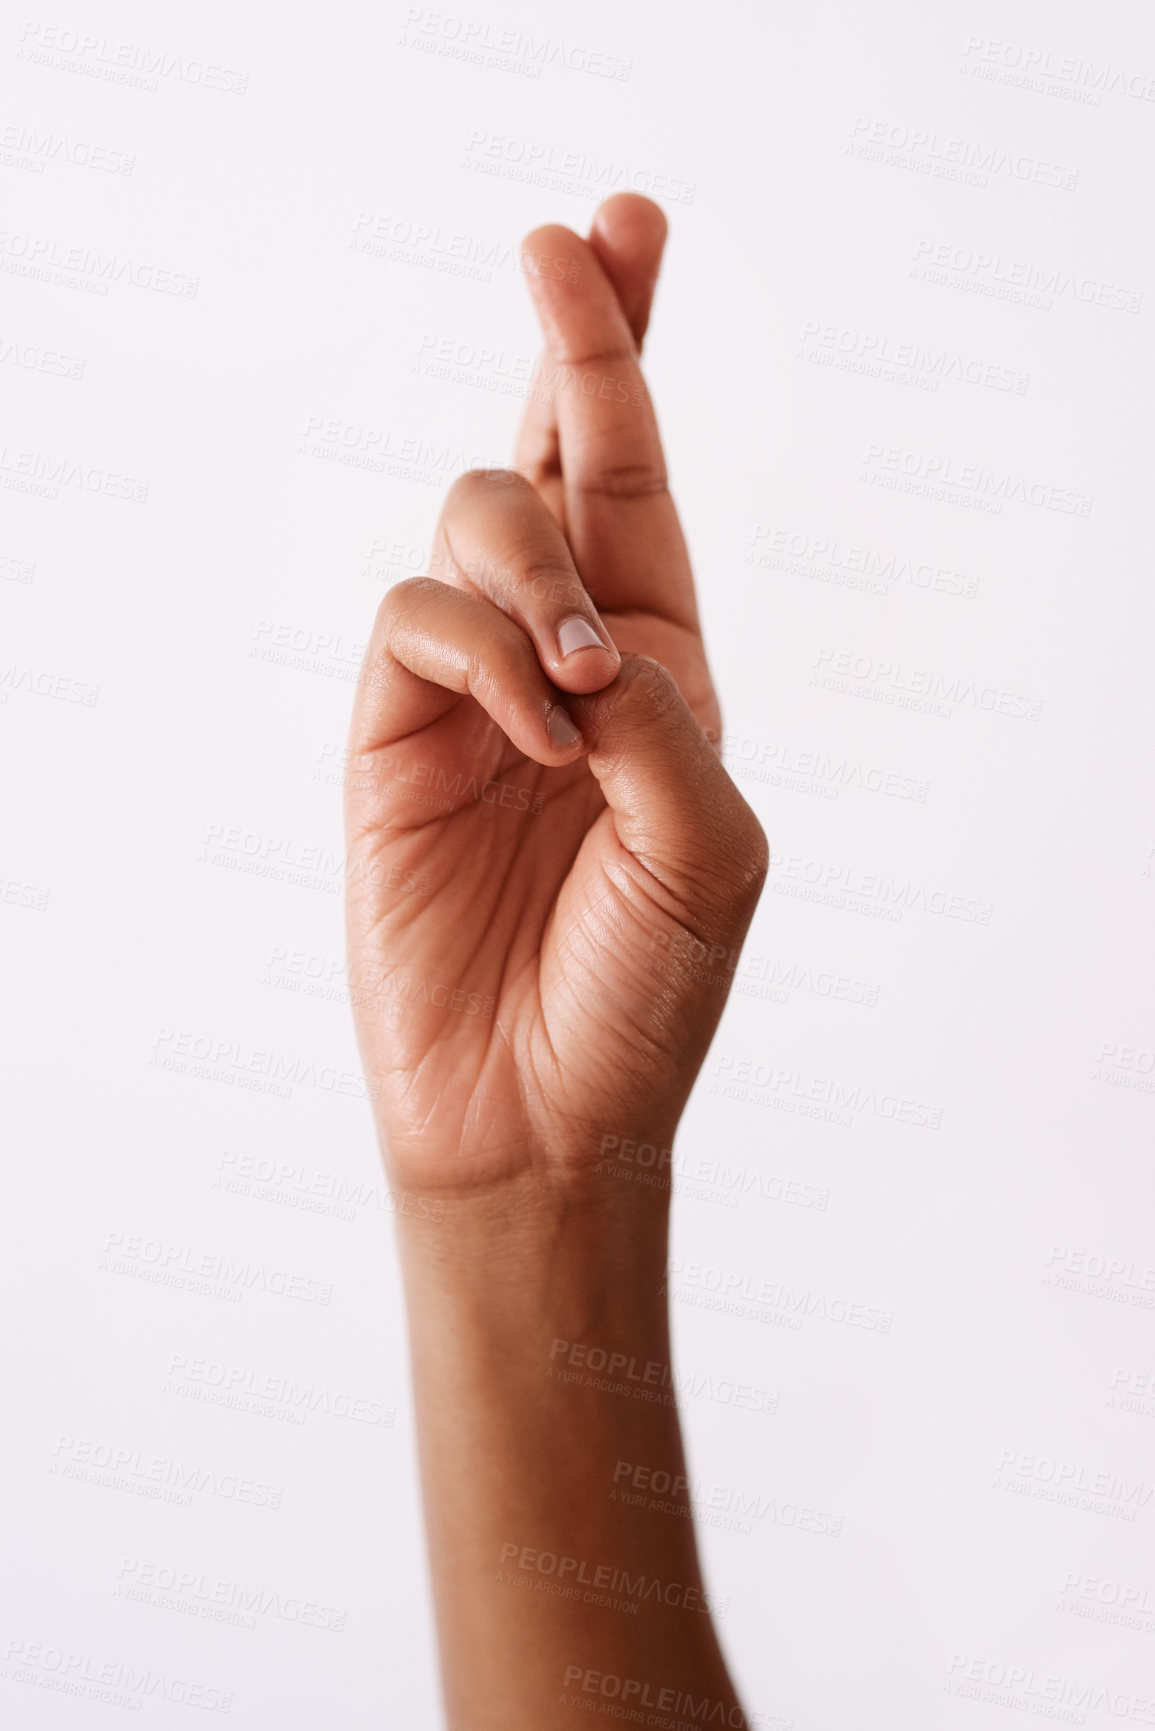 Buy stock photo Studio shot of an unrecognizable woman's hand keeping fingers crossed against a white background